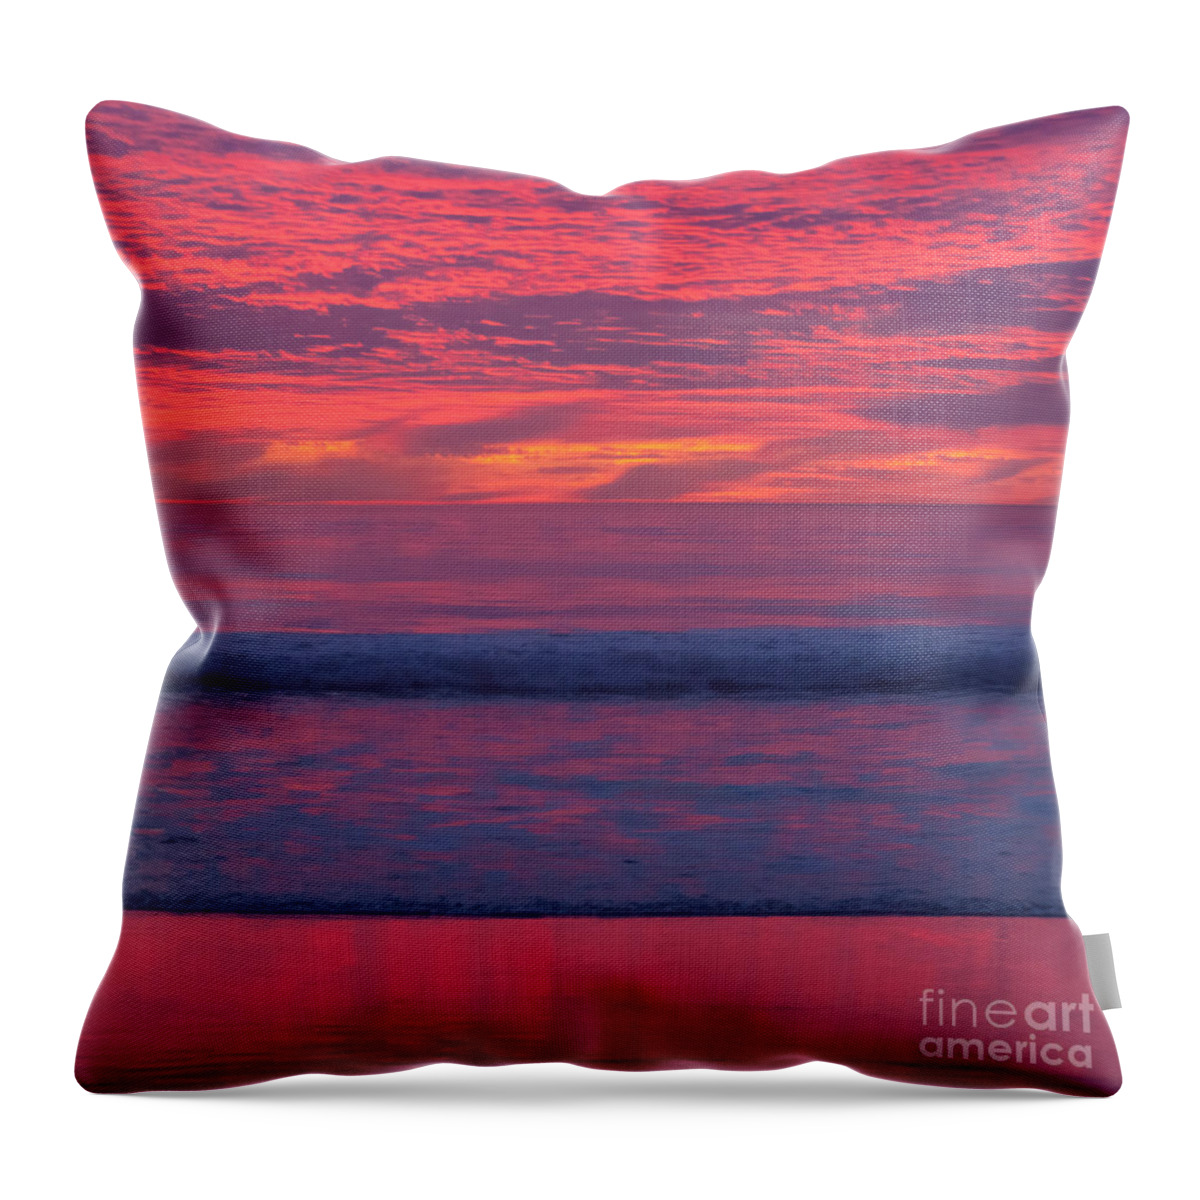 Sunset Throw Pillow featuring the photograph Sunset Colors by Ana V Ramirez